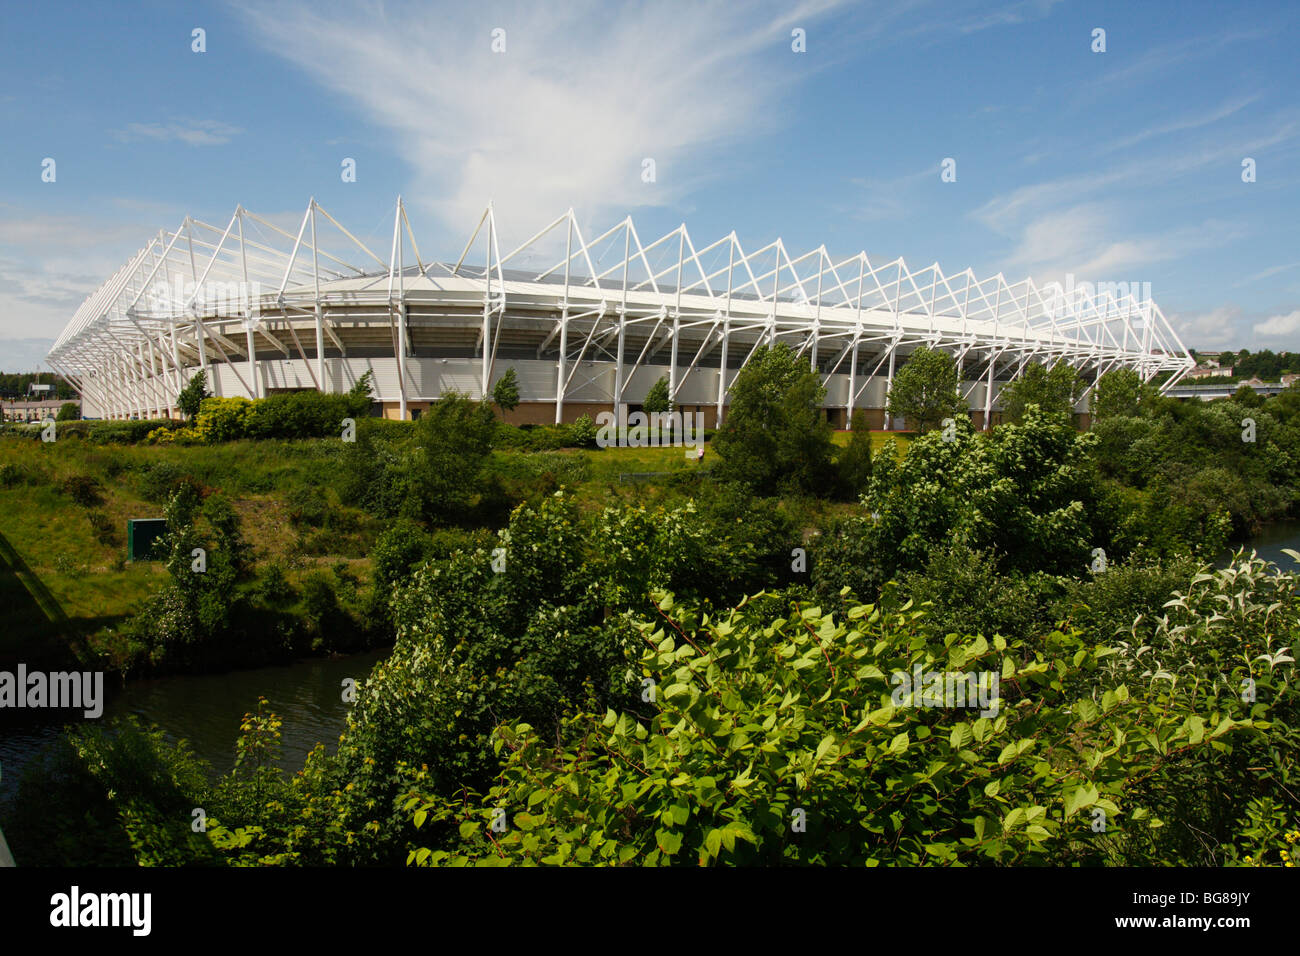 The Liberty Stadium, home of Swansea City F.C. and the Ospreys rugby team, Swansea, West Glamorgan, South Wales, U.K., in summer Stock Photo